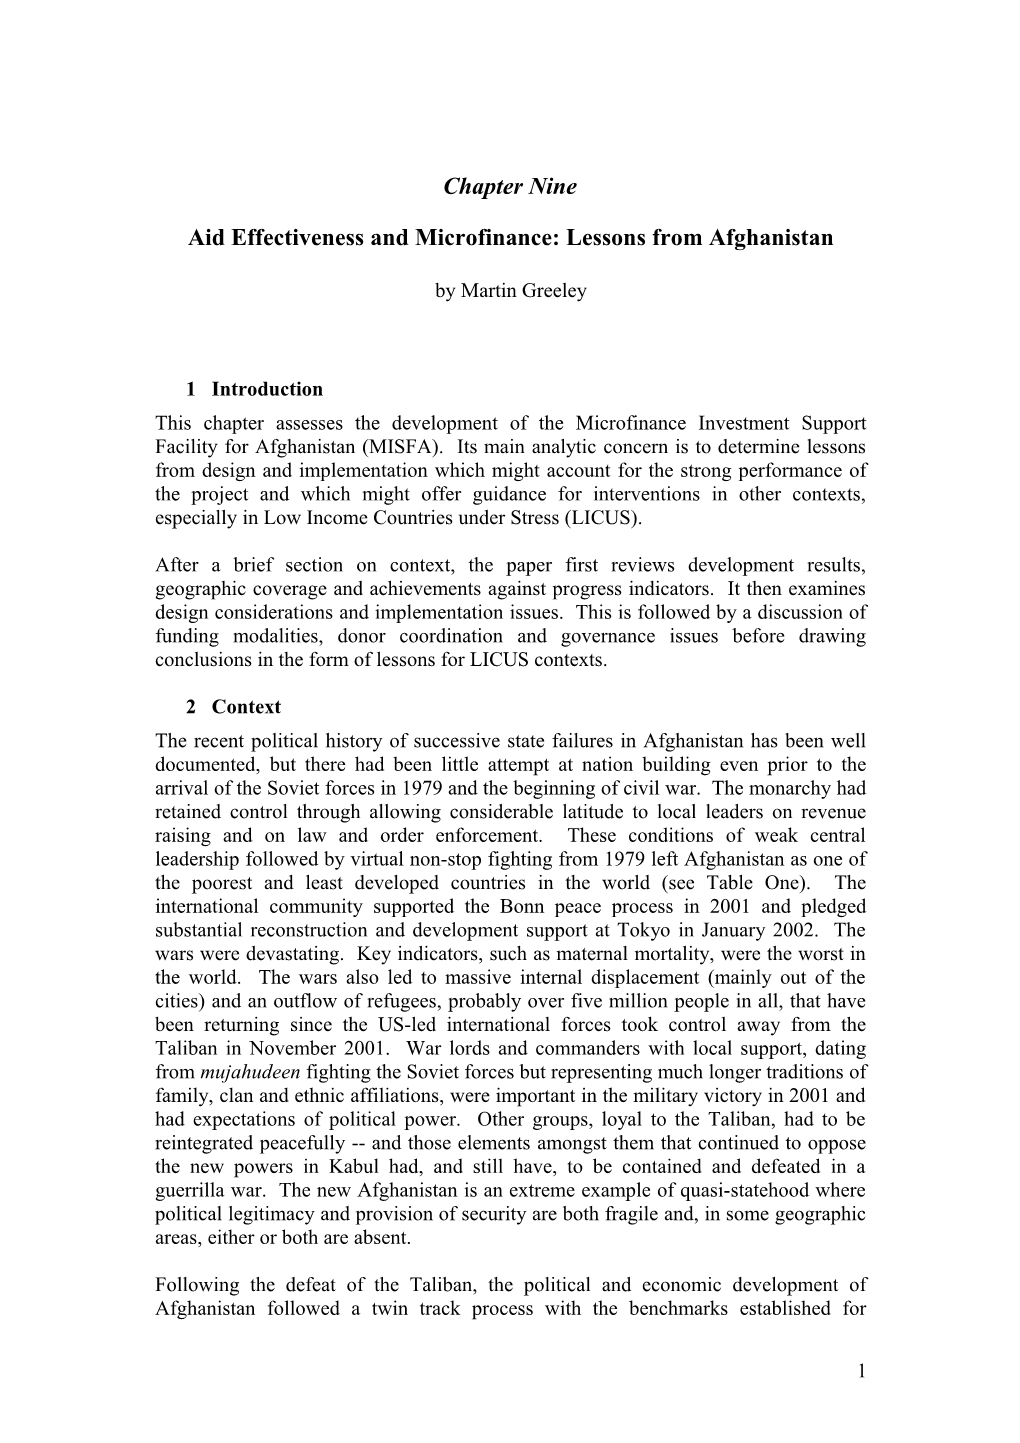 Aid Effectiveness and Microfinance: Lessons from Afghanistan